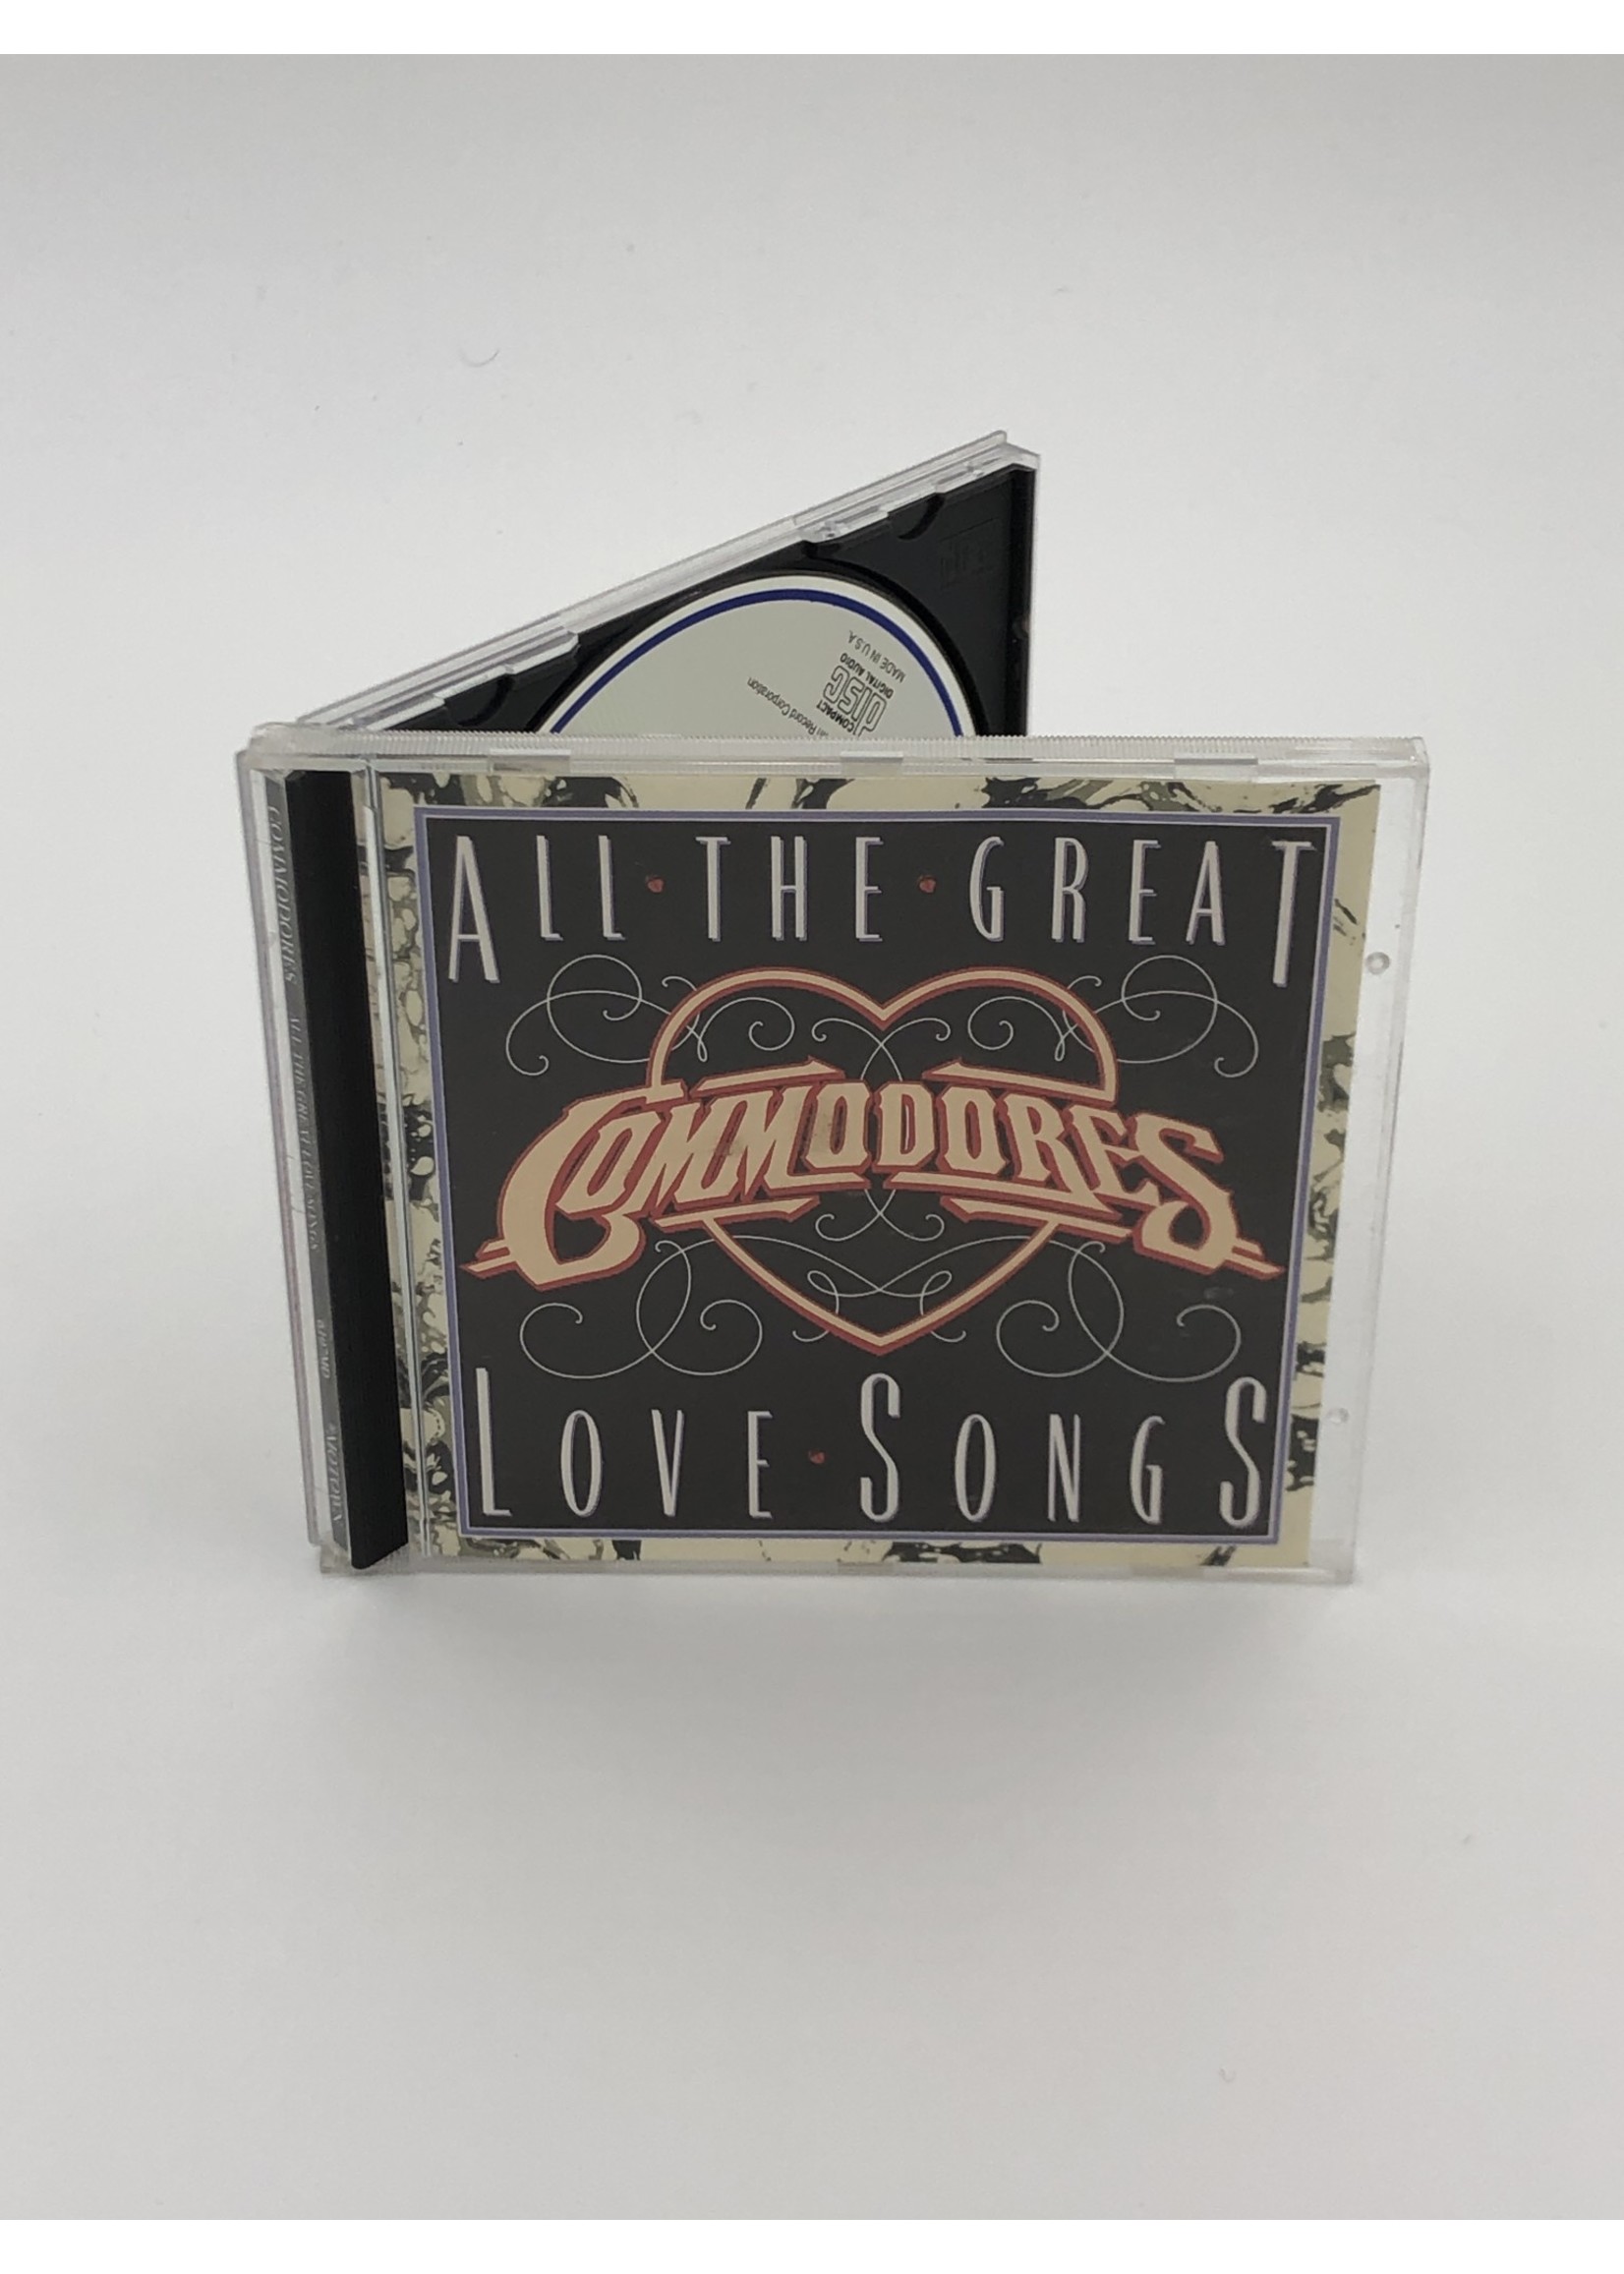 CD Commodores: All the Great Love Songs CD